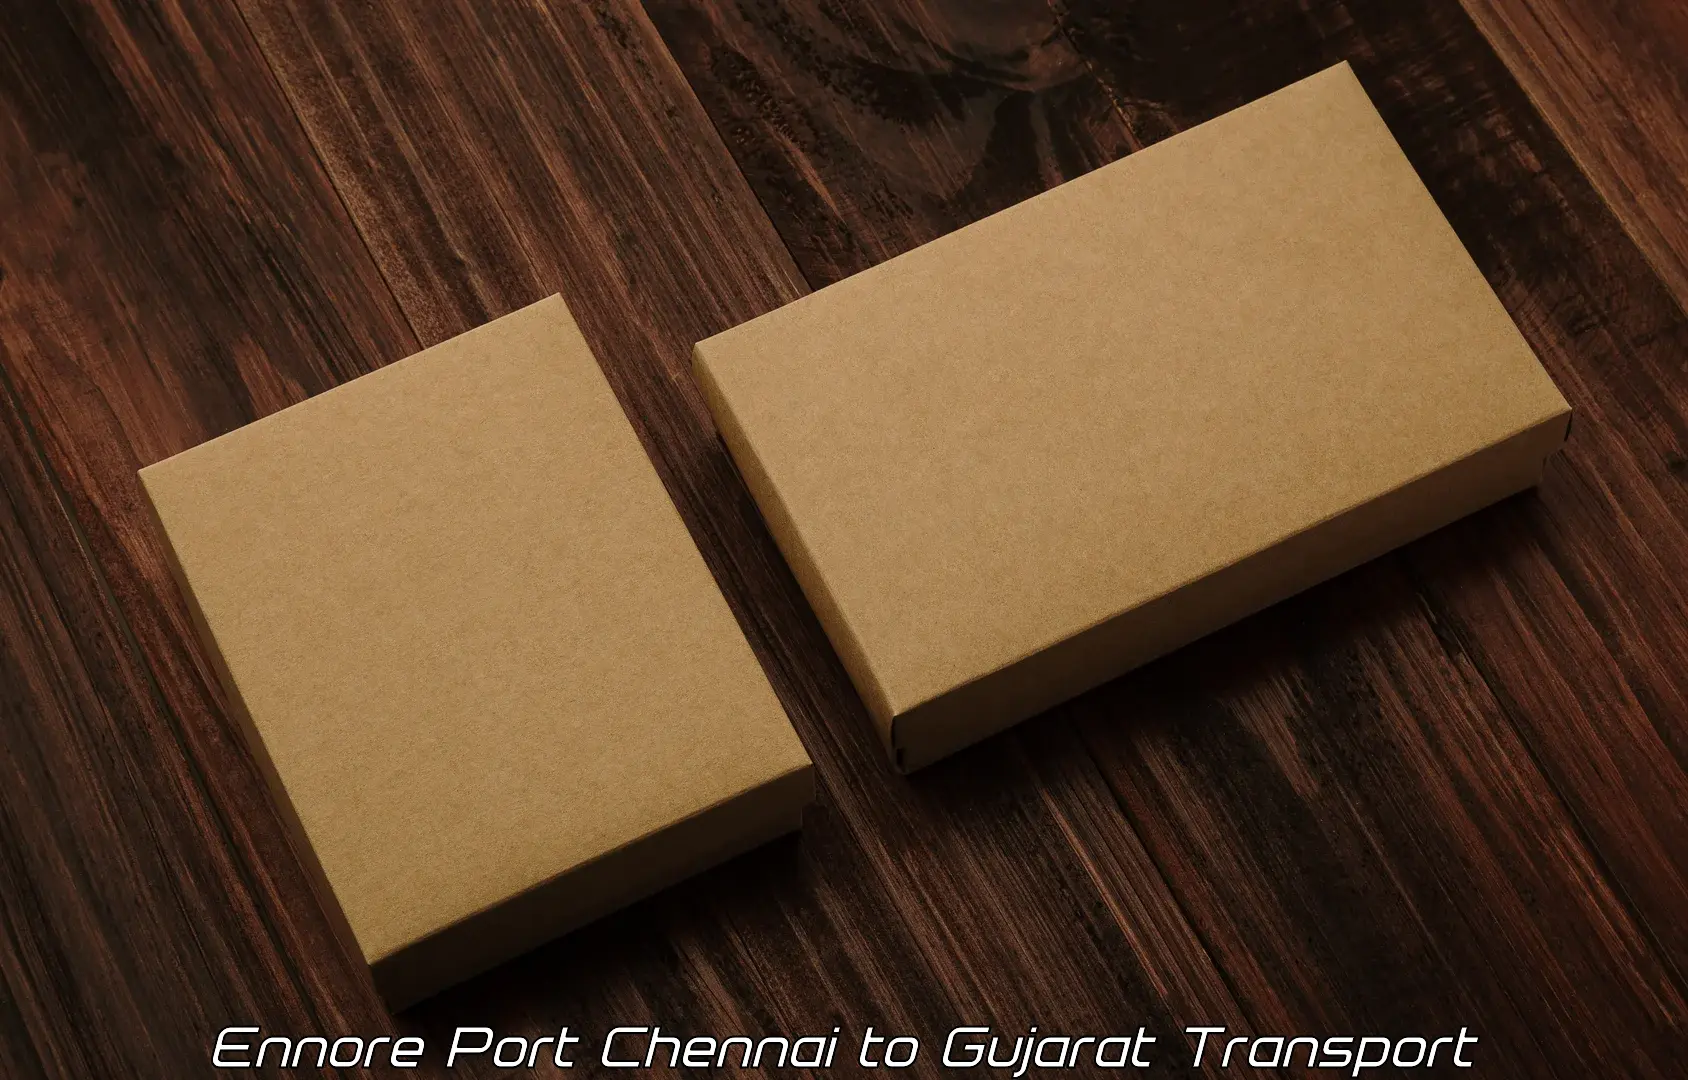 Express transport services Ennore Port Chennai to Bayad